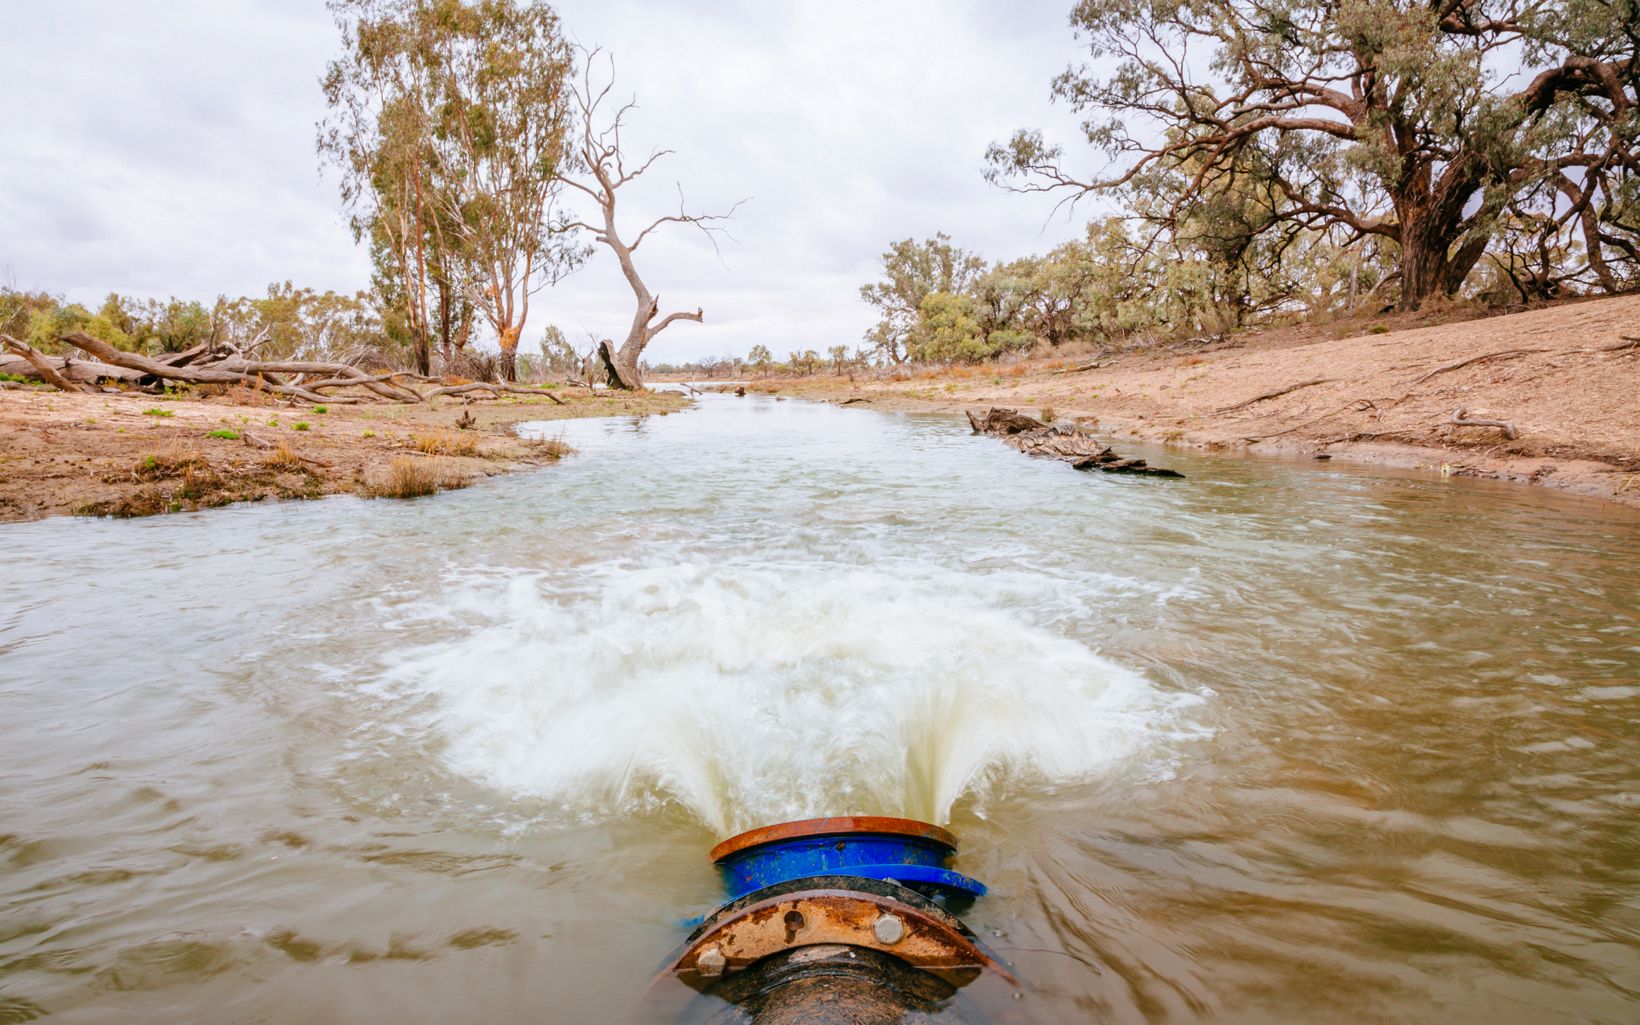 as part of the Murray-Darling Basin Balanced Water Fund.